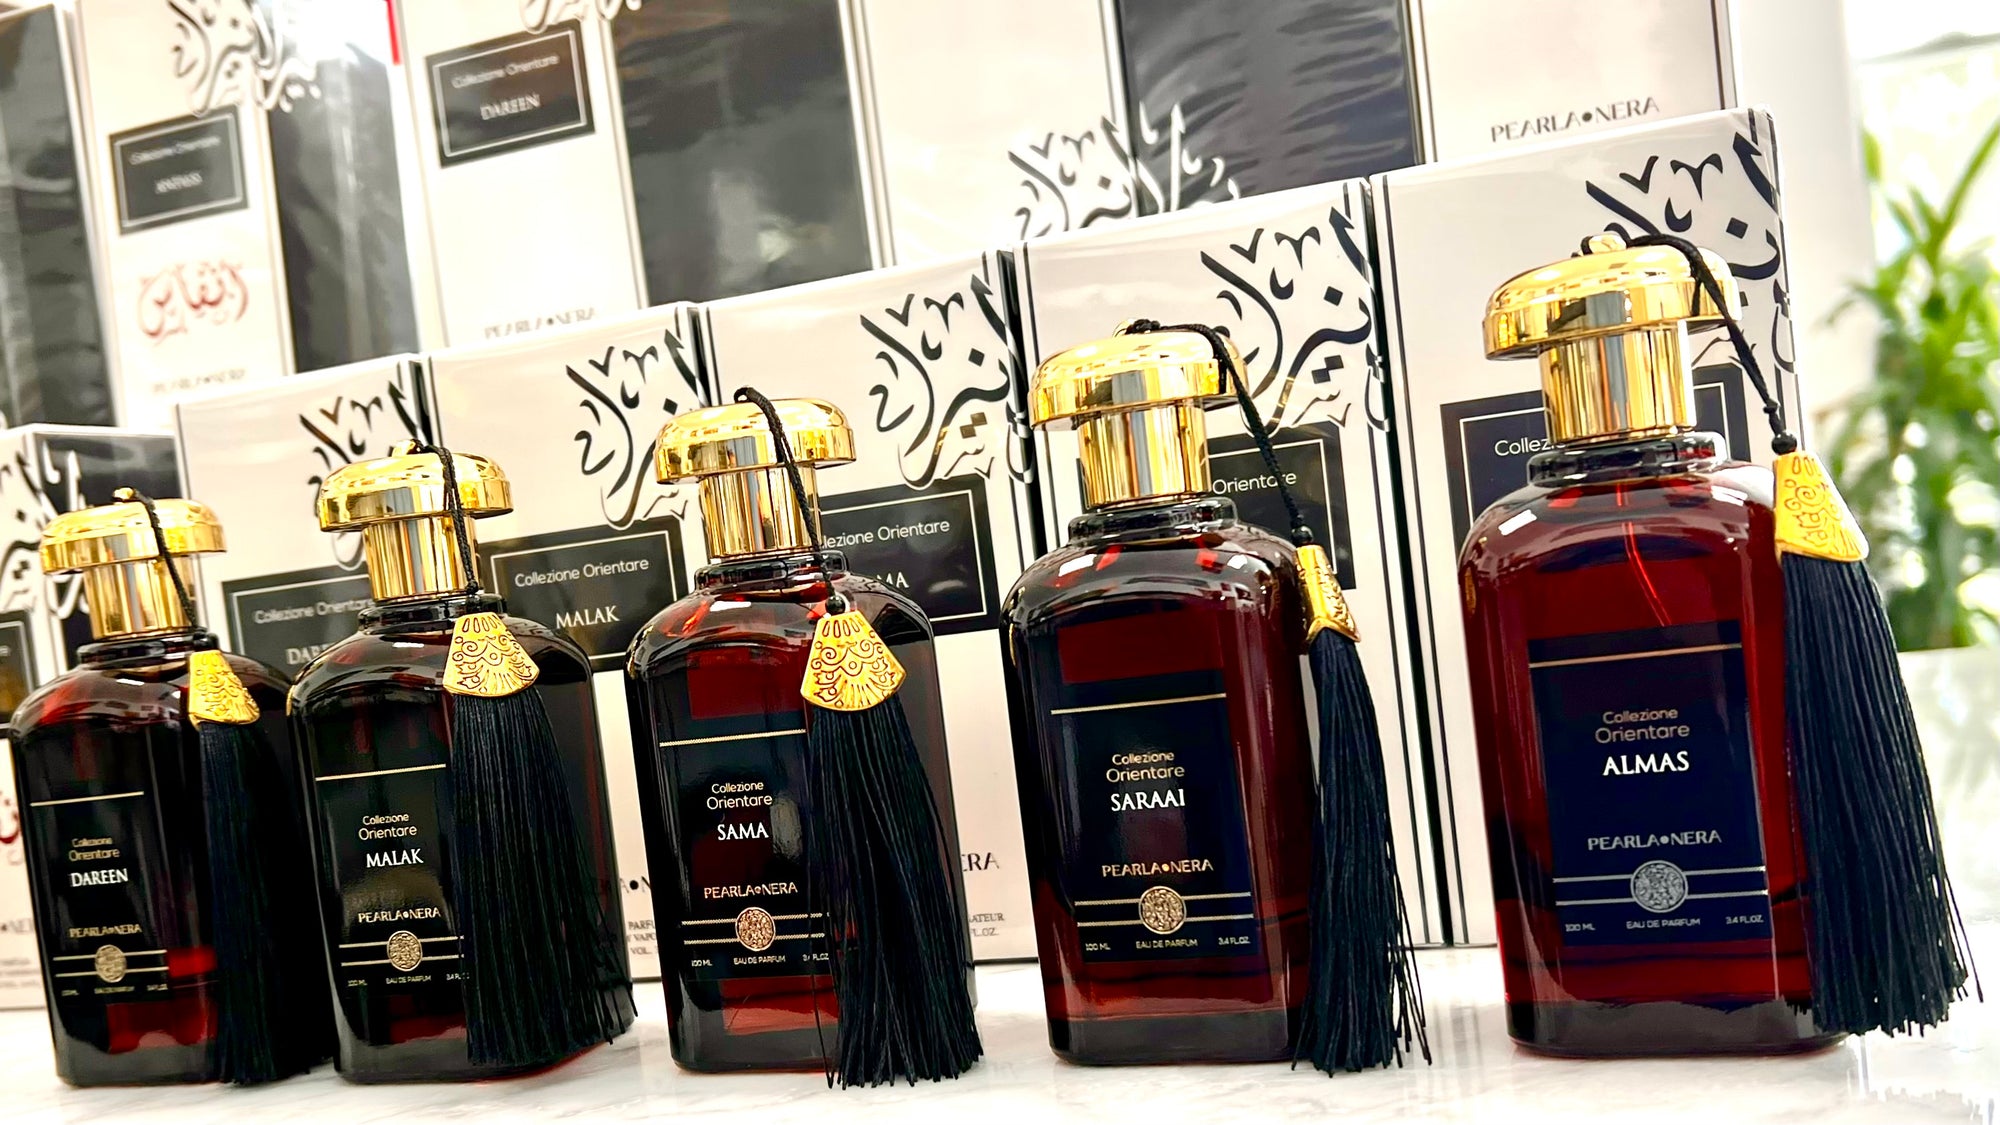 If you're new to PEARLANERA, ultra-luxe fragrances, you are in for such a treat.